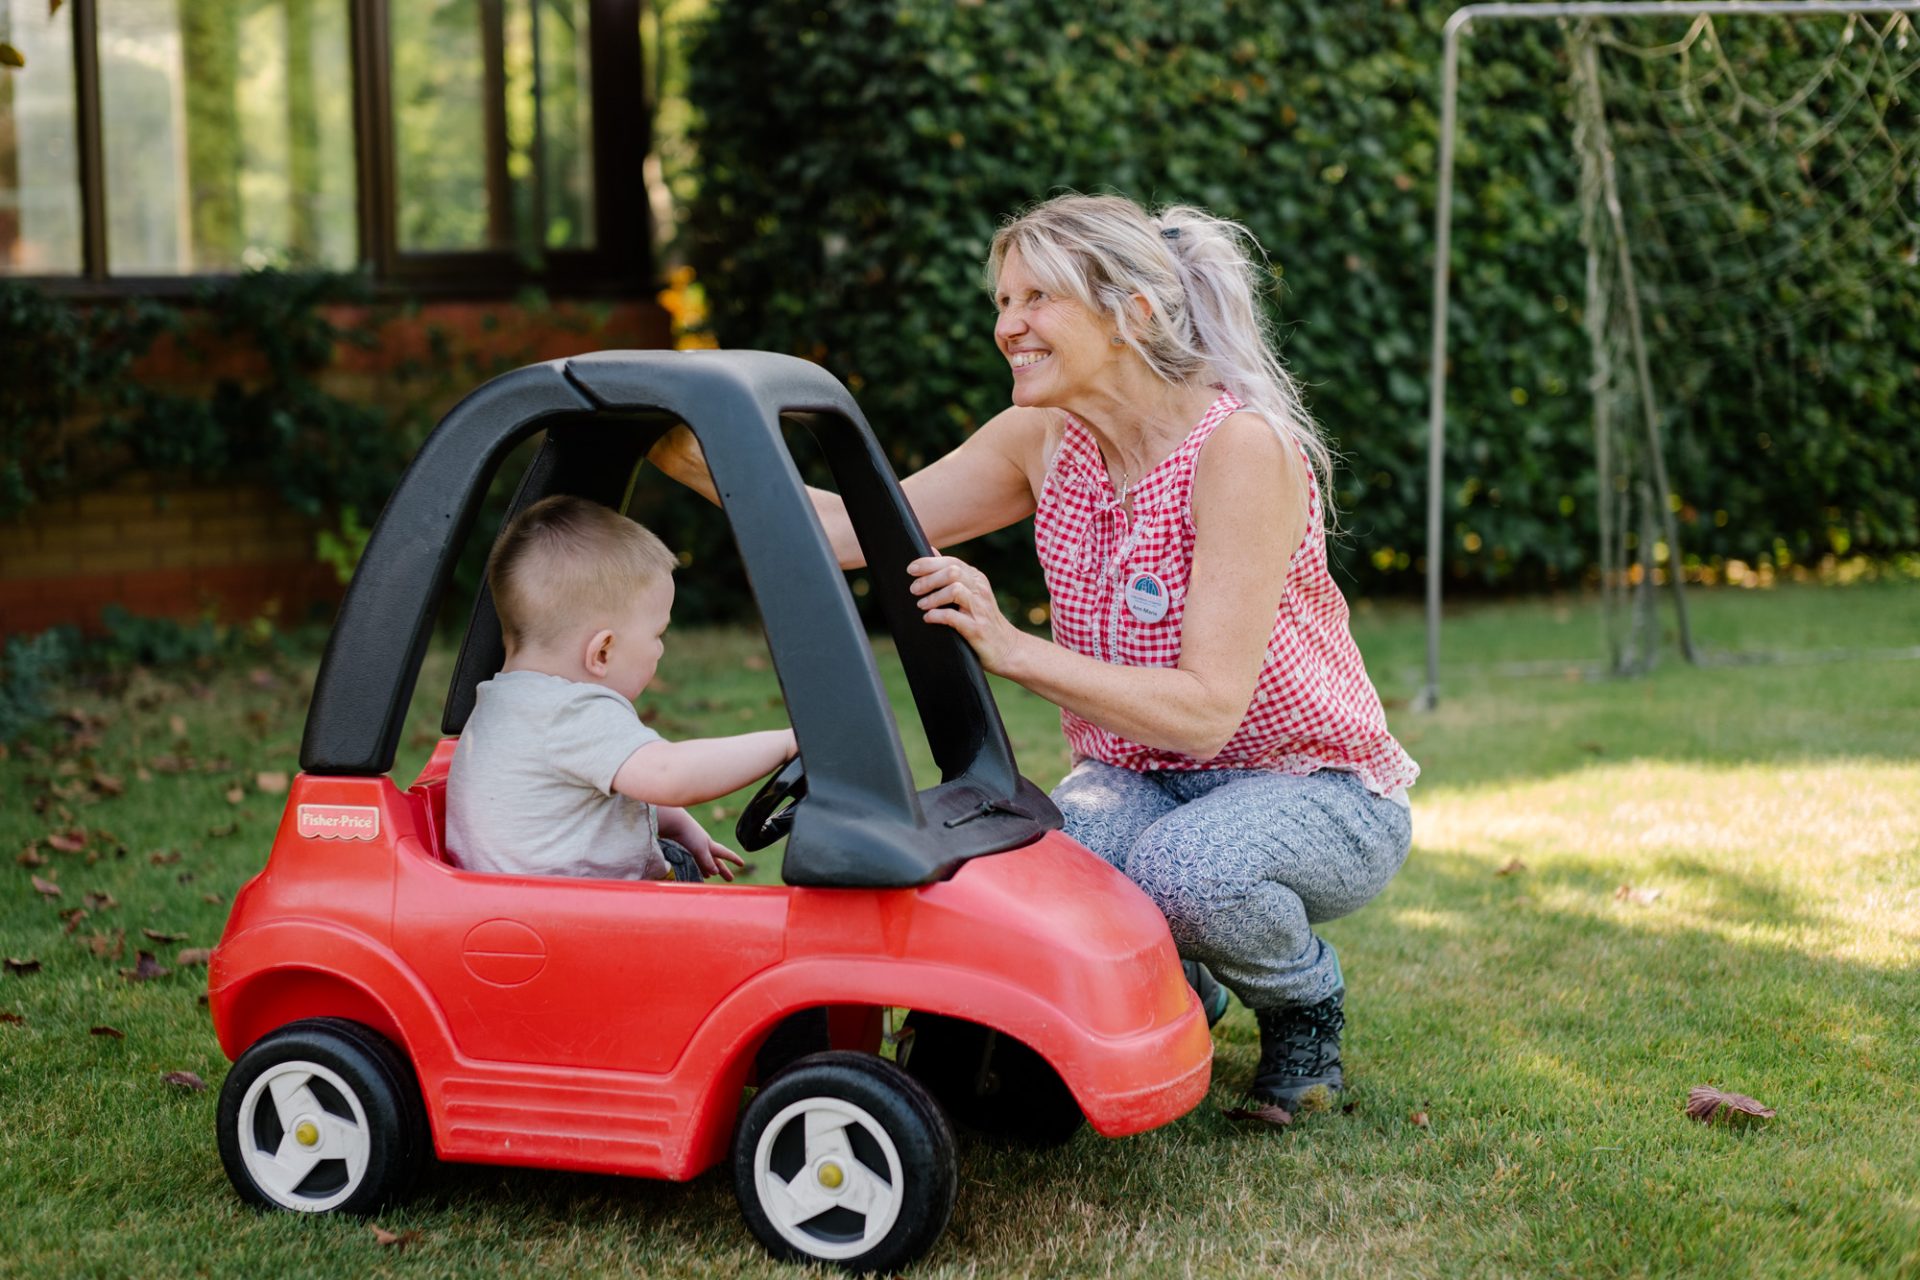 Child sat in toy car with care staff